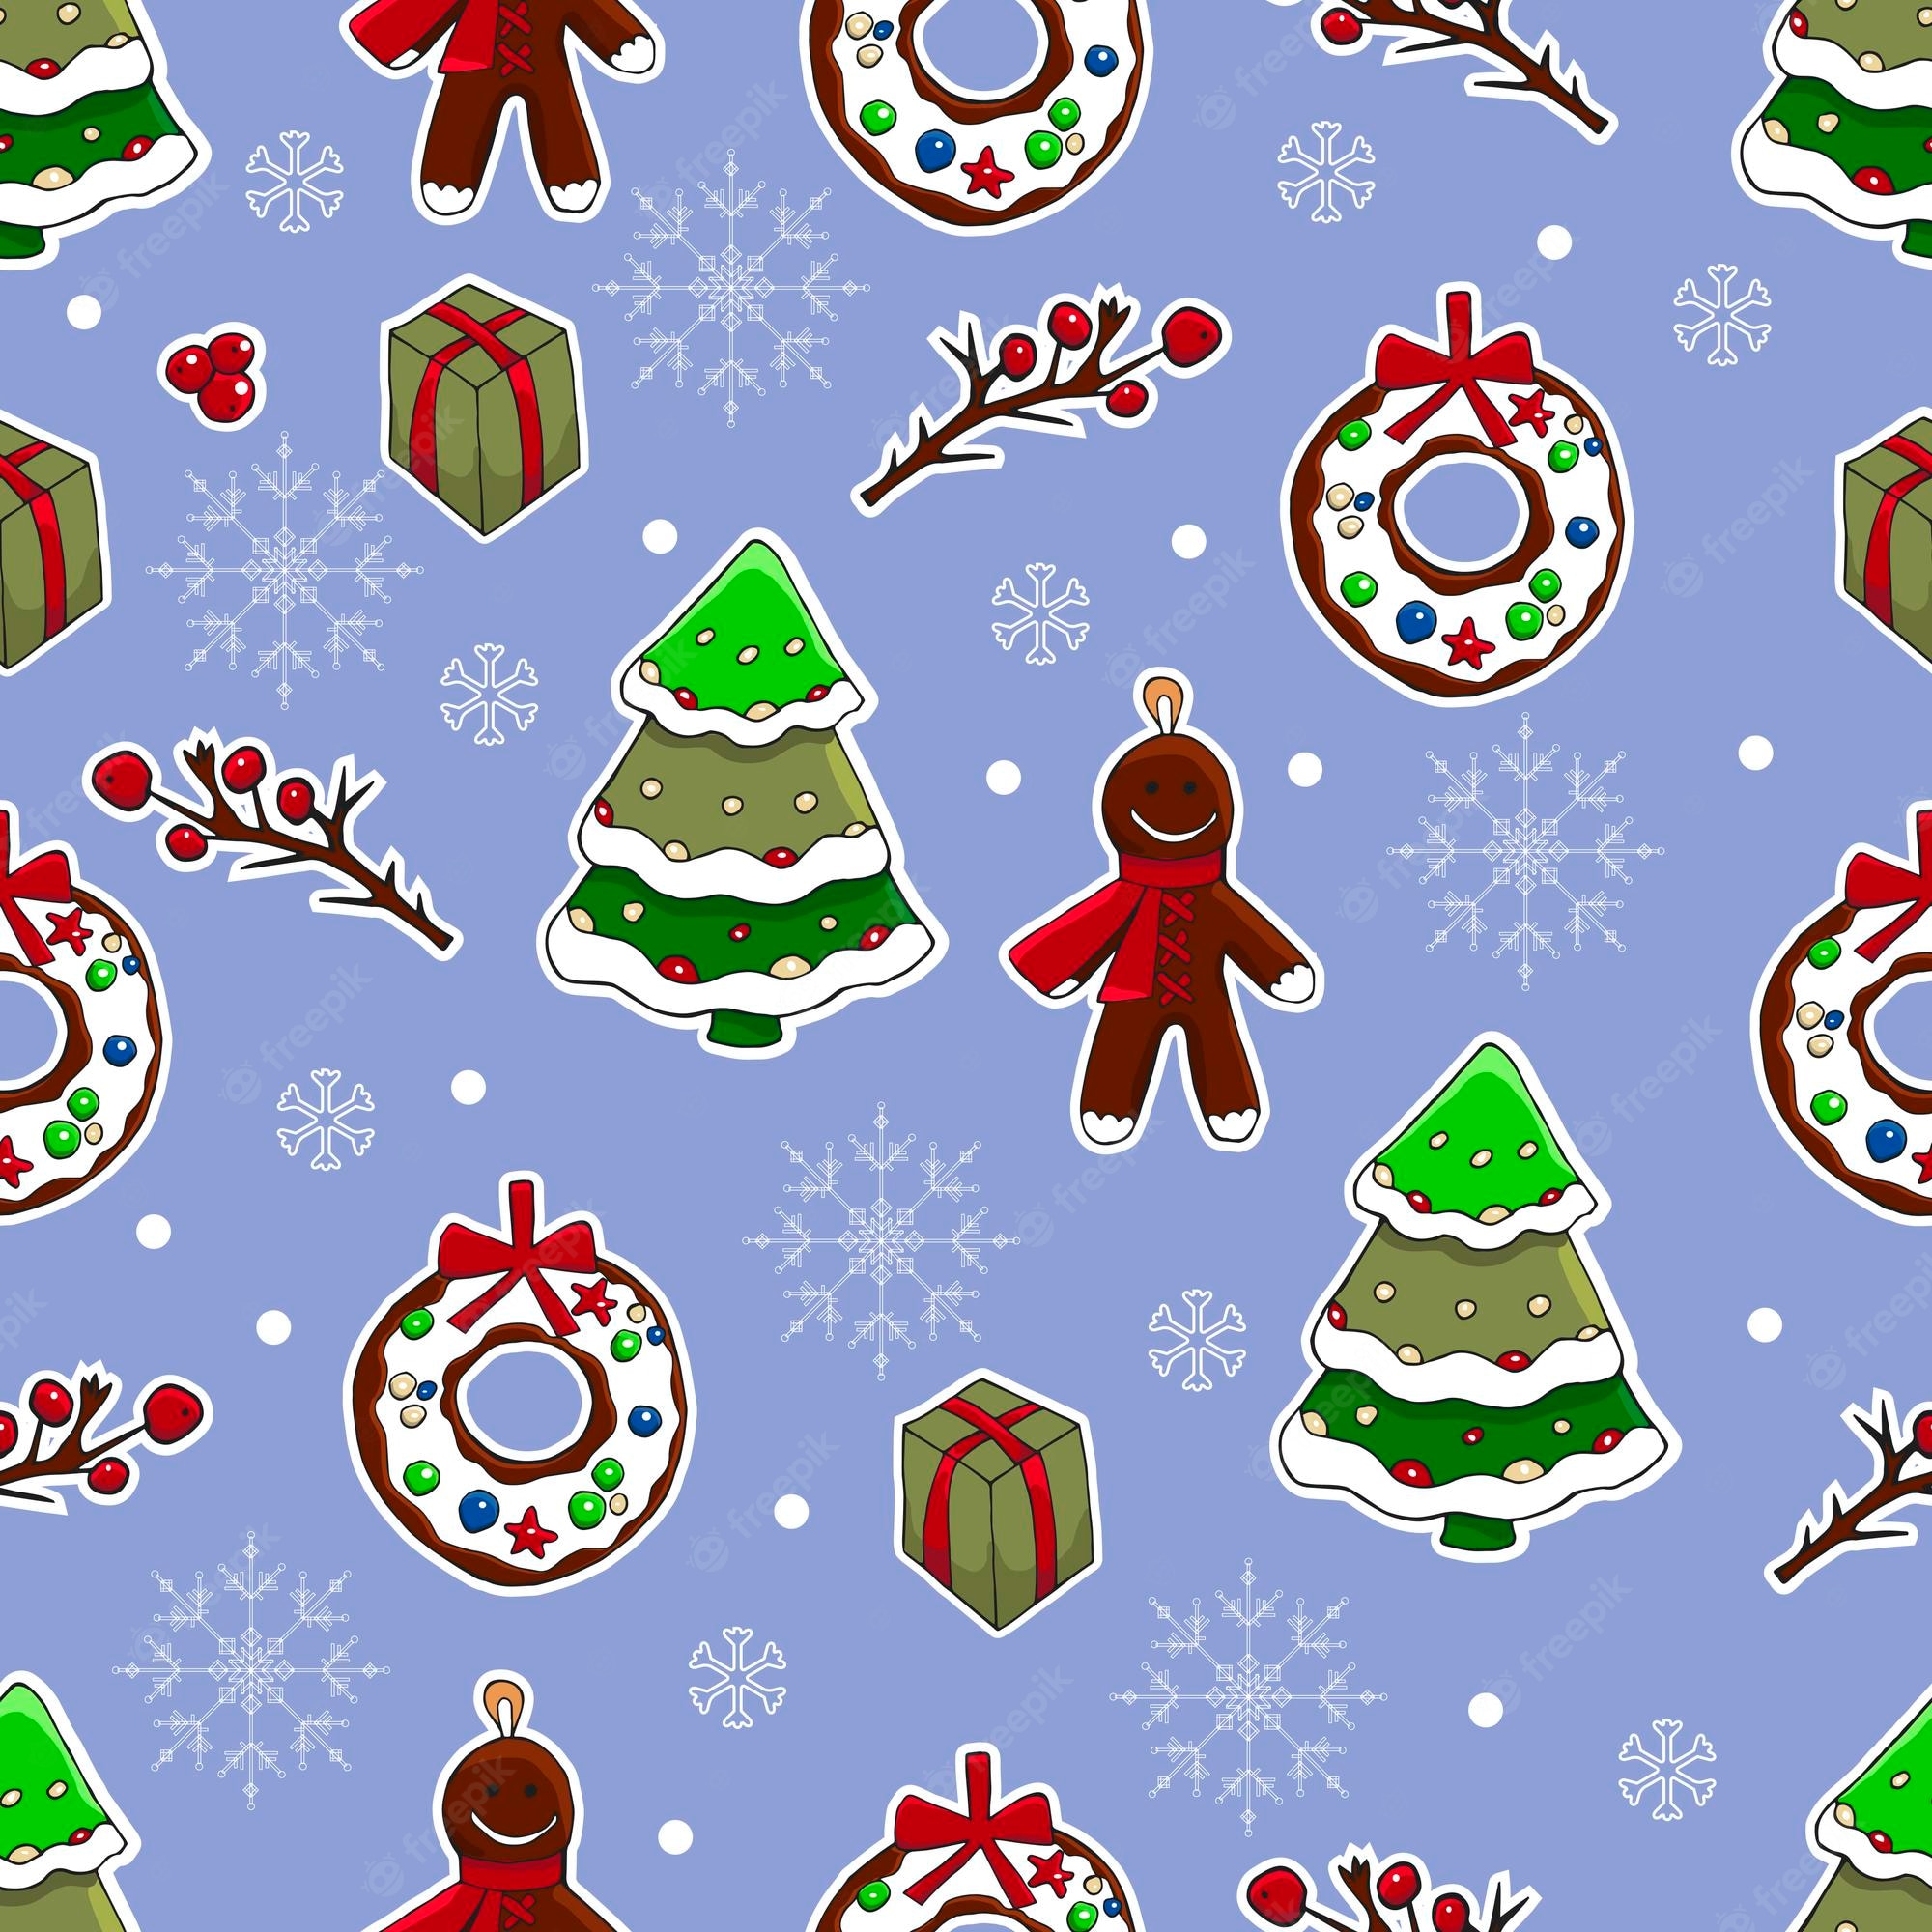 Premium Vector. Cute christmas and new year hand drawn background vector seamless pattern for wrapping wallpaper scrabooking holly christmas tree gingerbread man santa candies lollipops wreaths